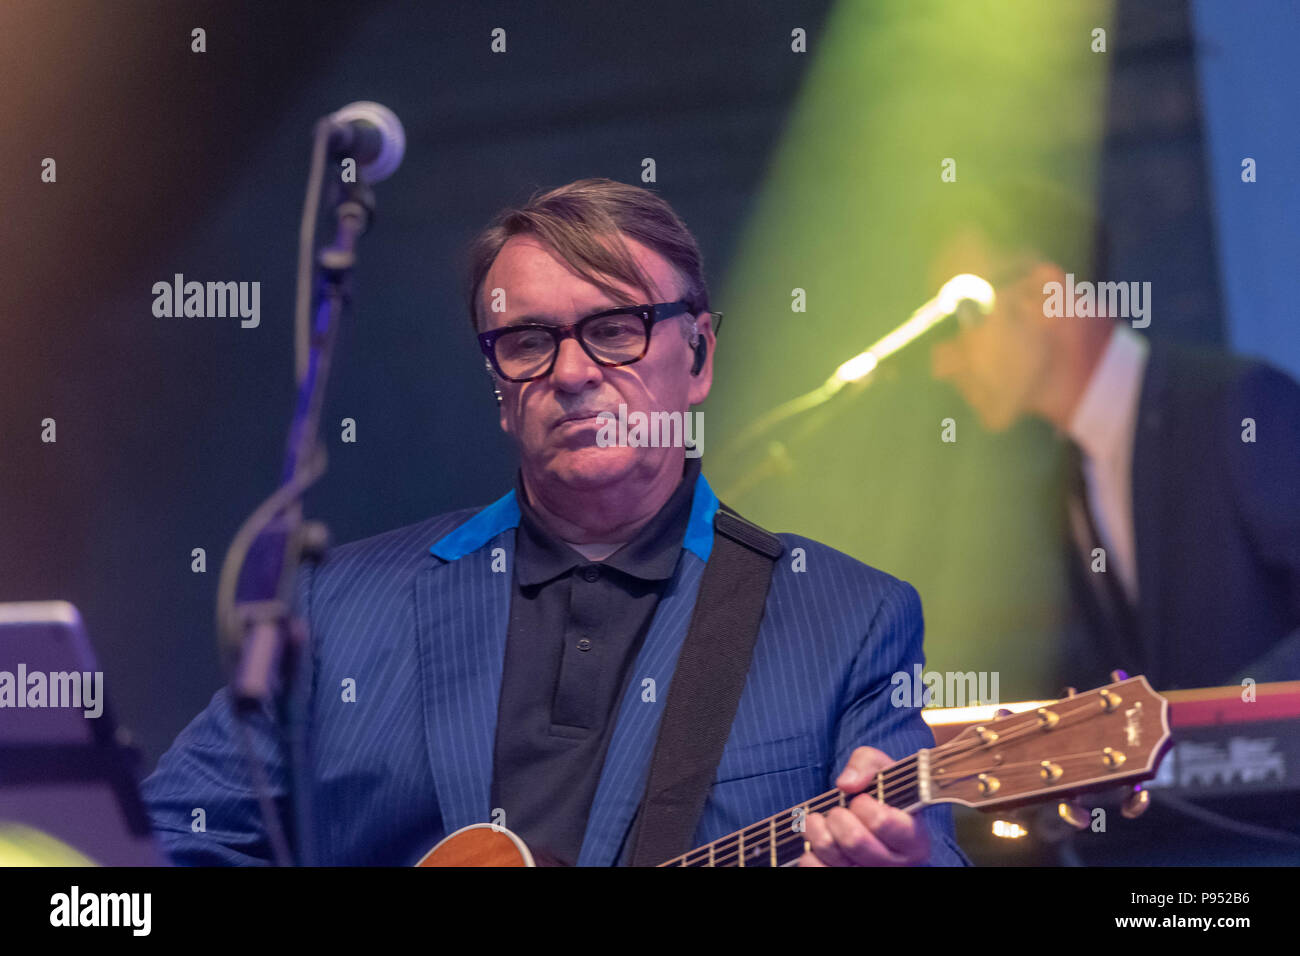 Brentwood Essex, 14 luglio 2018 Brentwood Music Festival 2018 a Brentwood Centre Squeeze con Chris Difford e Glenn Tilbrook Credit Ian Davidson/Alamy Live News Foto Stock